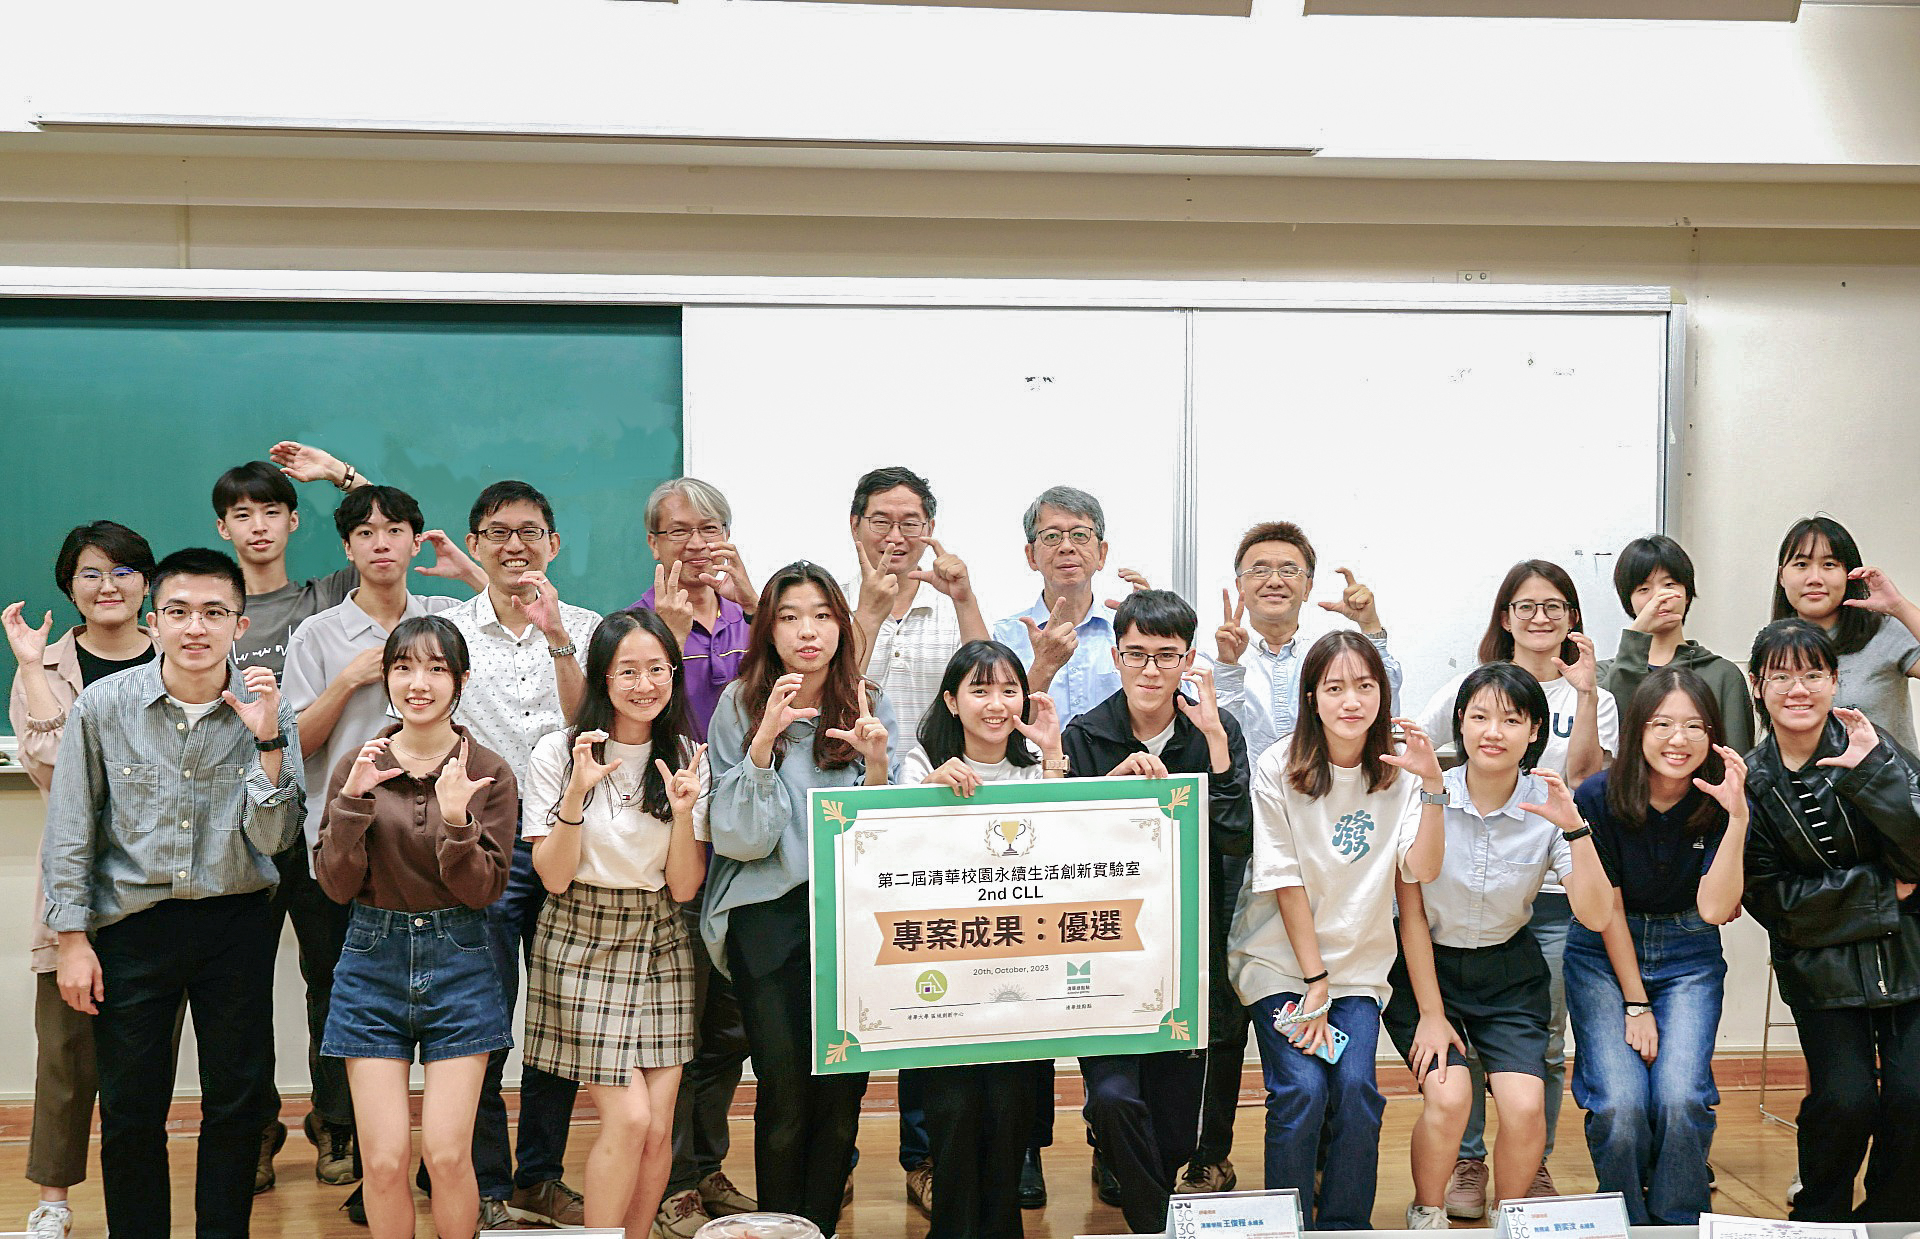 The NTHU Campus as a Living Lab held a competition using the “University Proposing Questions, Students Solving Questions” model, which fosters collaboration between faculty and students to achieve a sustainable campus.